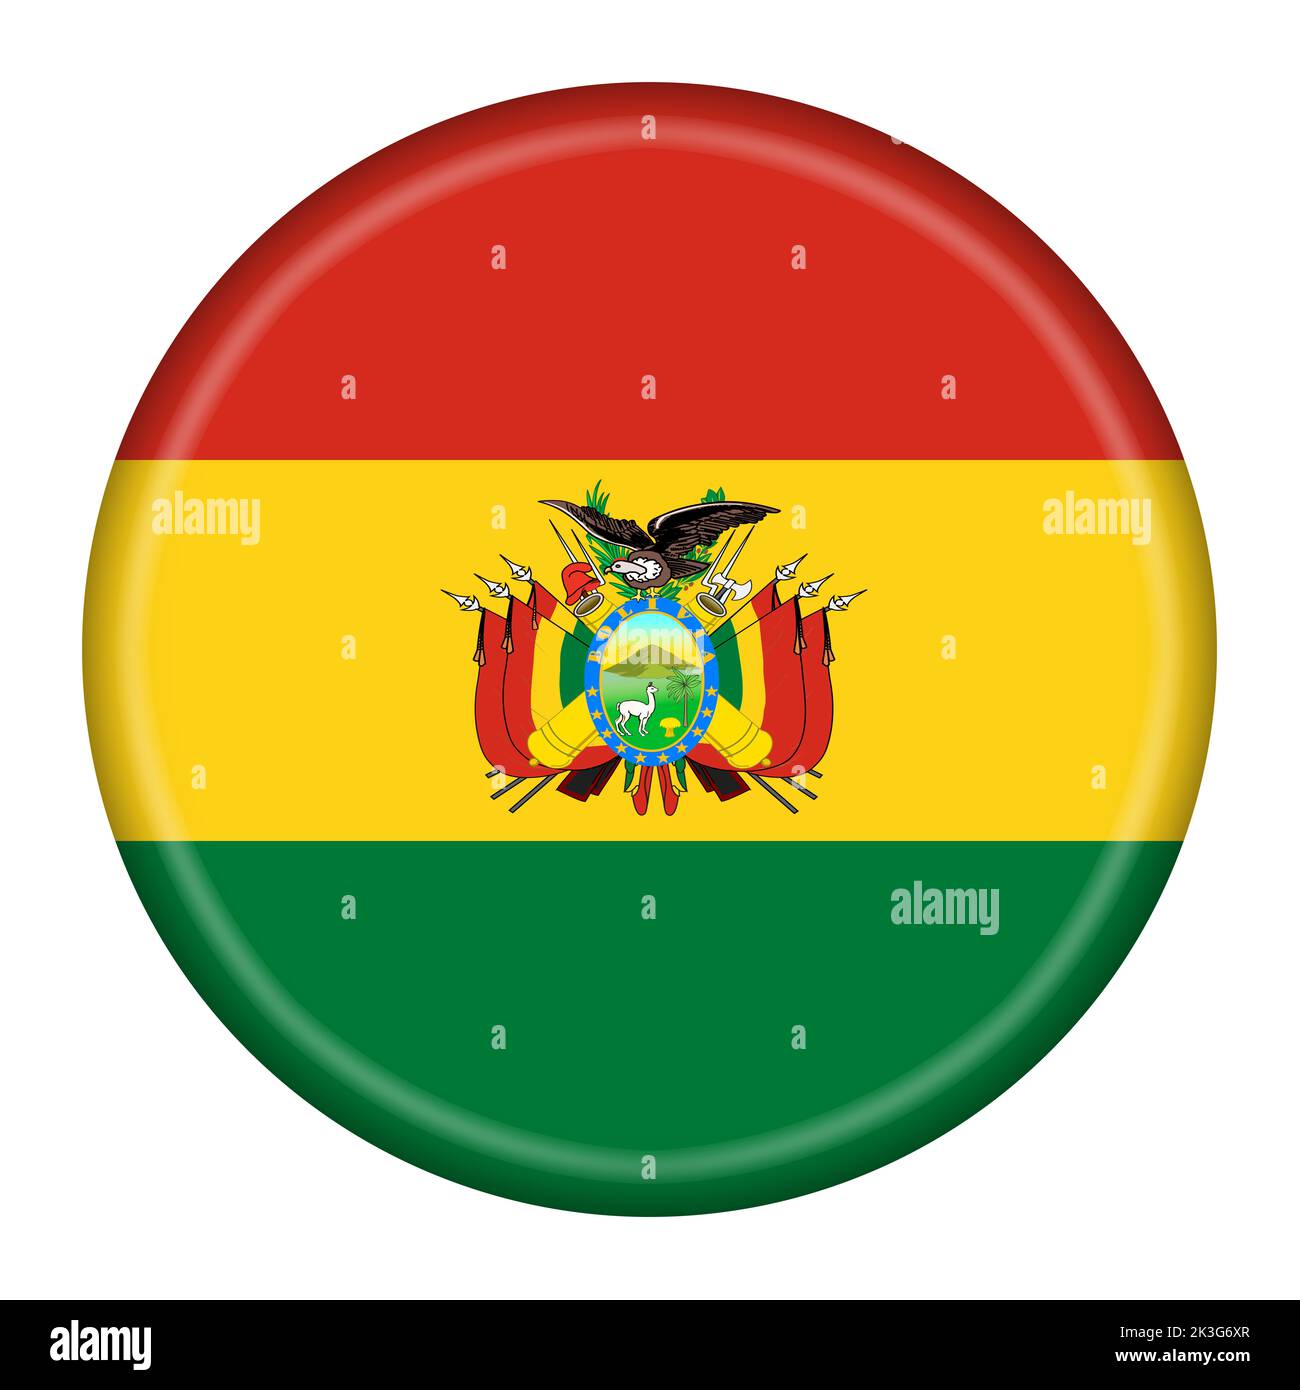 Bolivia flag button 3d illustration with clipping path Stock Photo